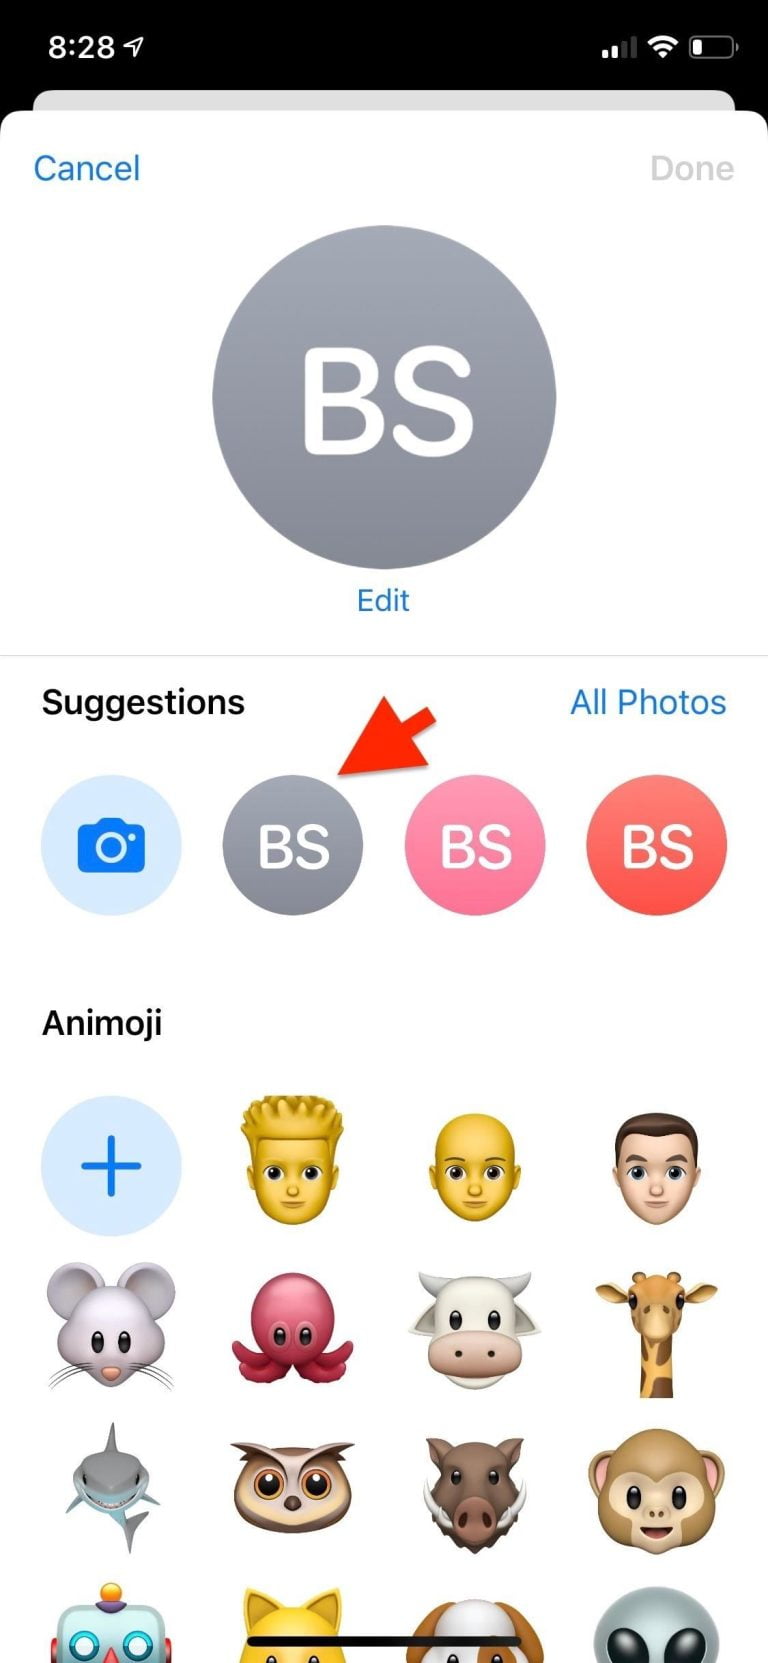 Imojiapp for iPhone lets you create your own Emojis for iMessage